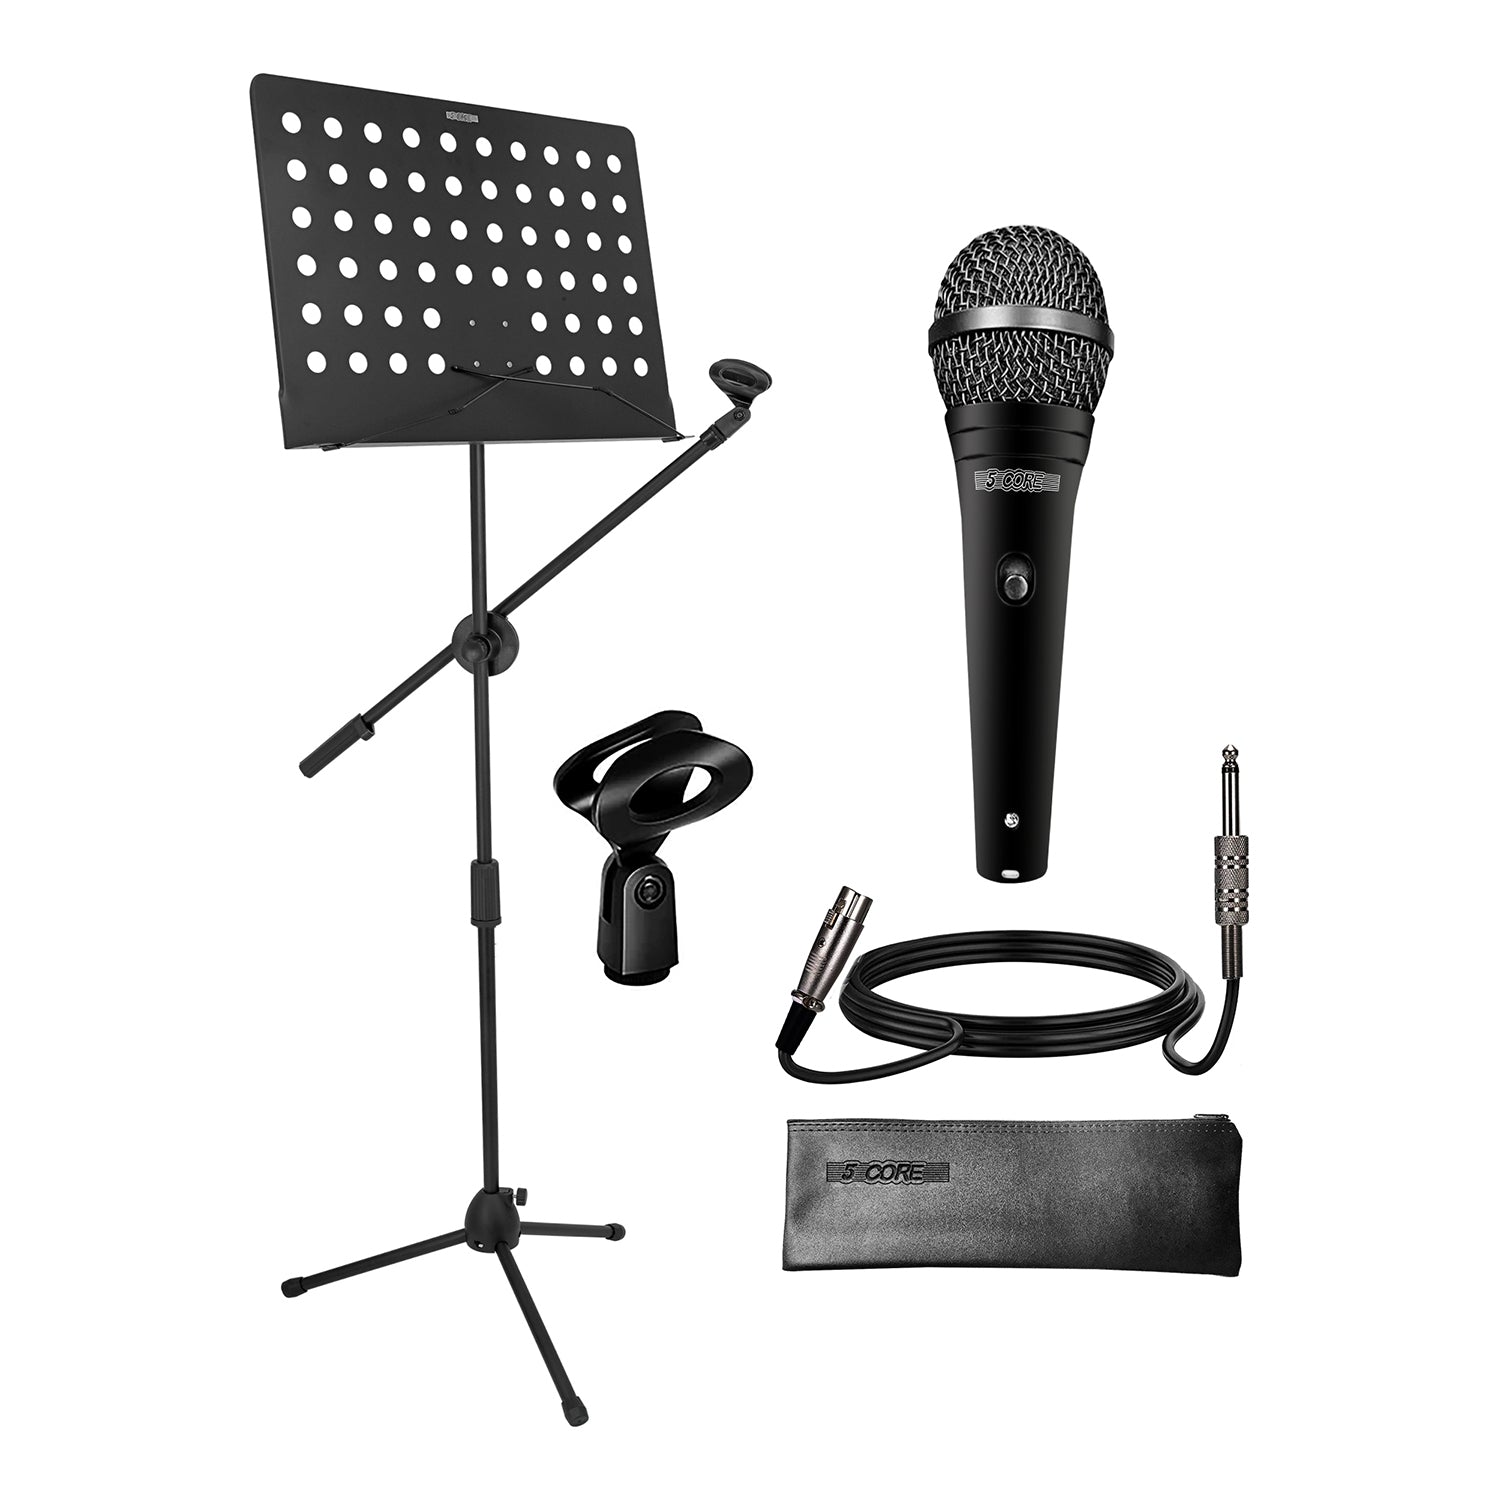 5Core Handheld Dynamic Microphone & Tripod Metal Stand w Sheet Music Included Vocal XLR Wired Mic